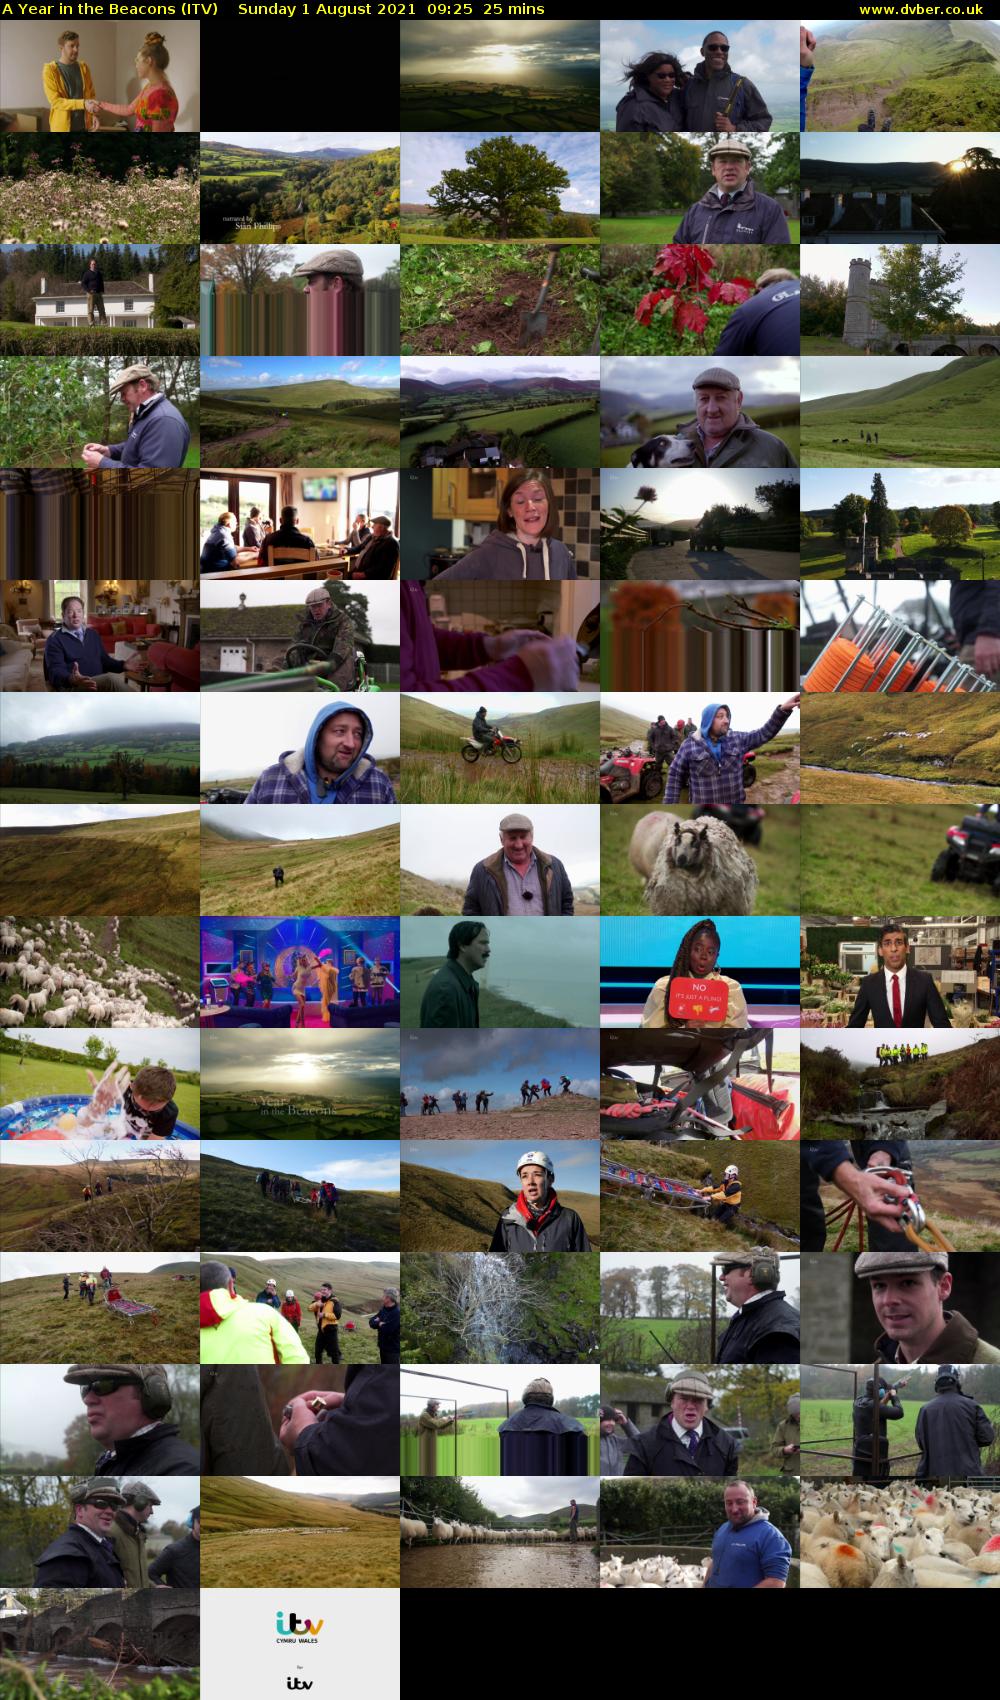 A Year in the Beacons (ITV) Sunday 1 August 2021 09:25 - 09:50